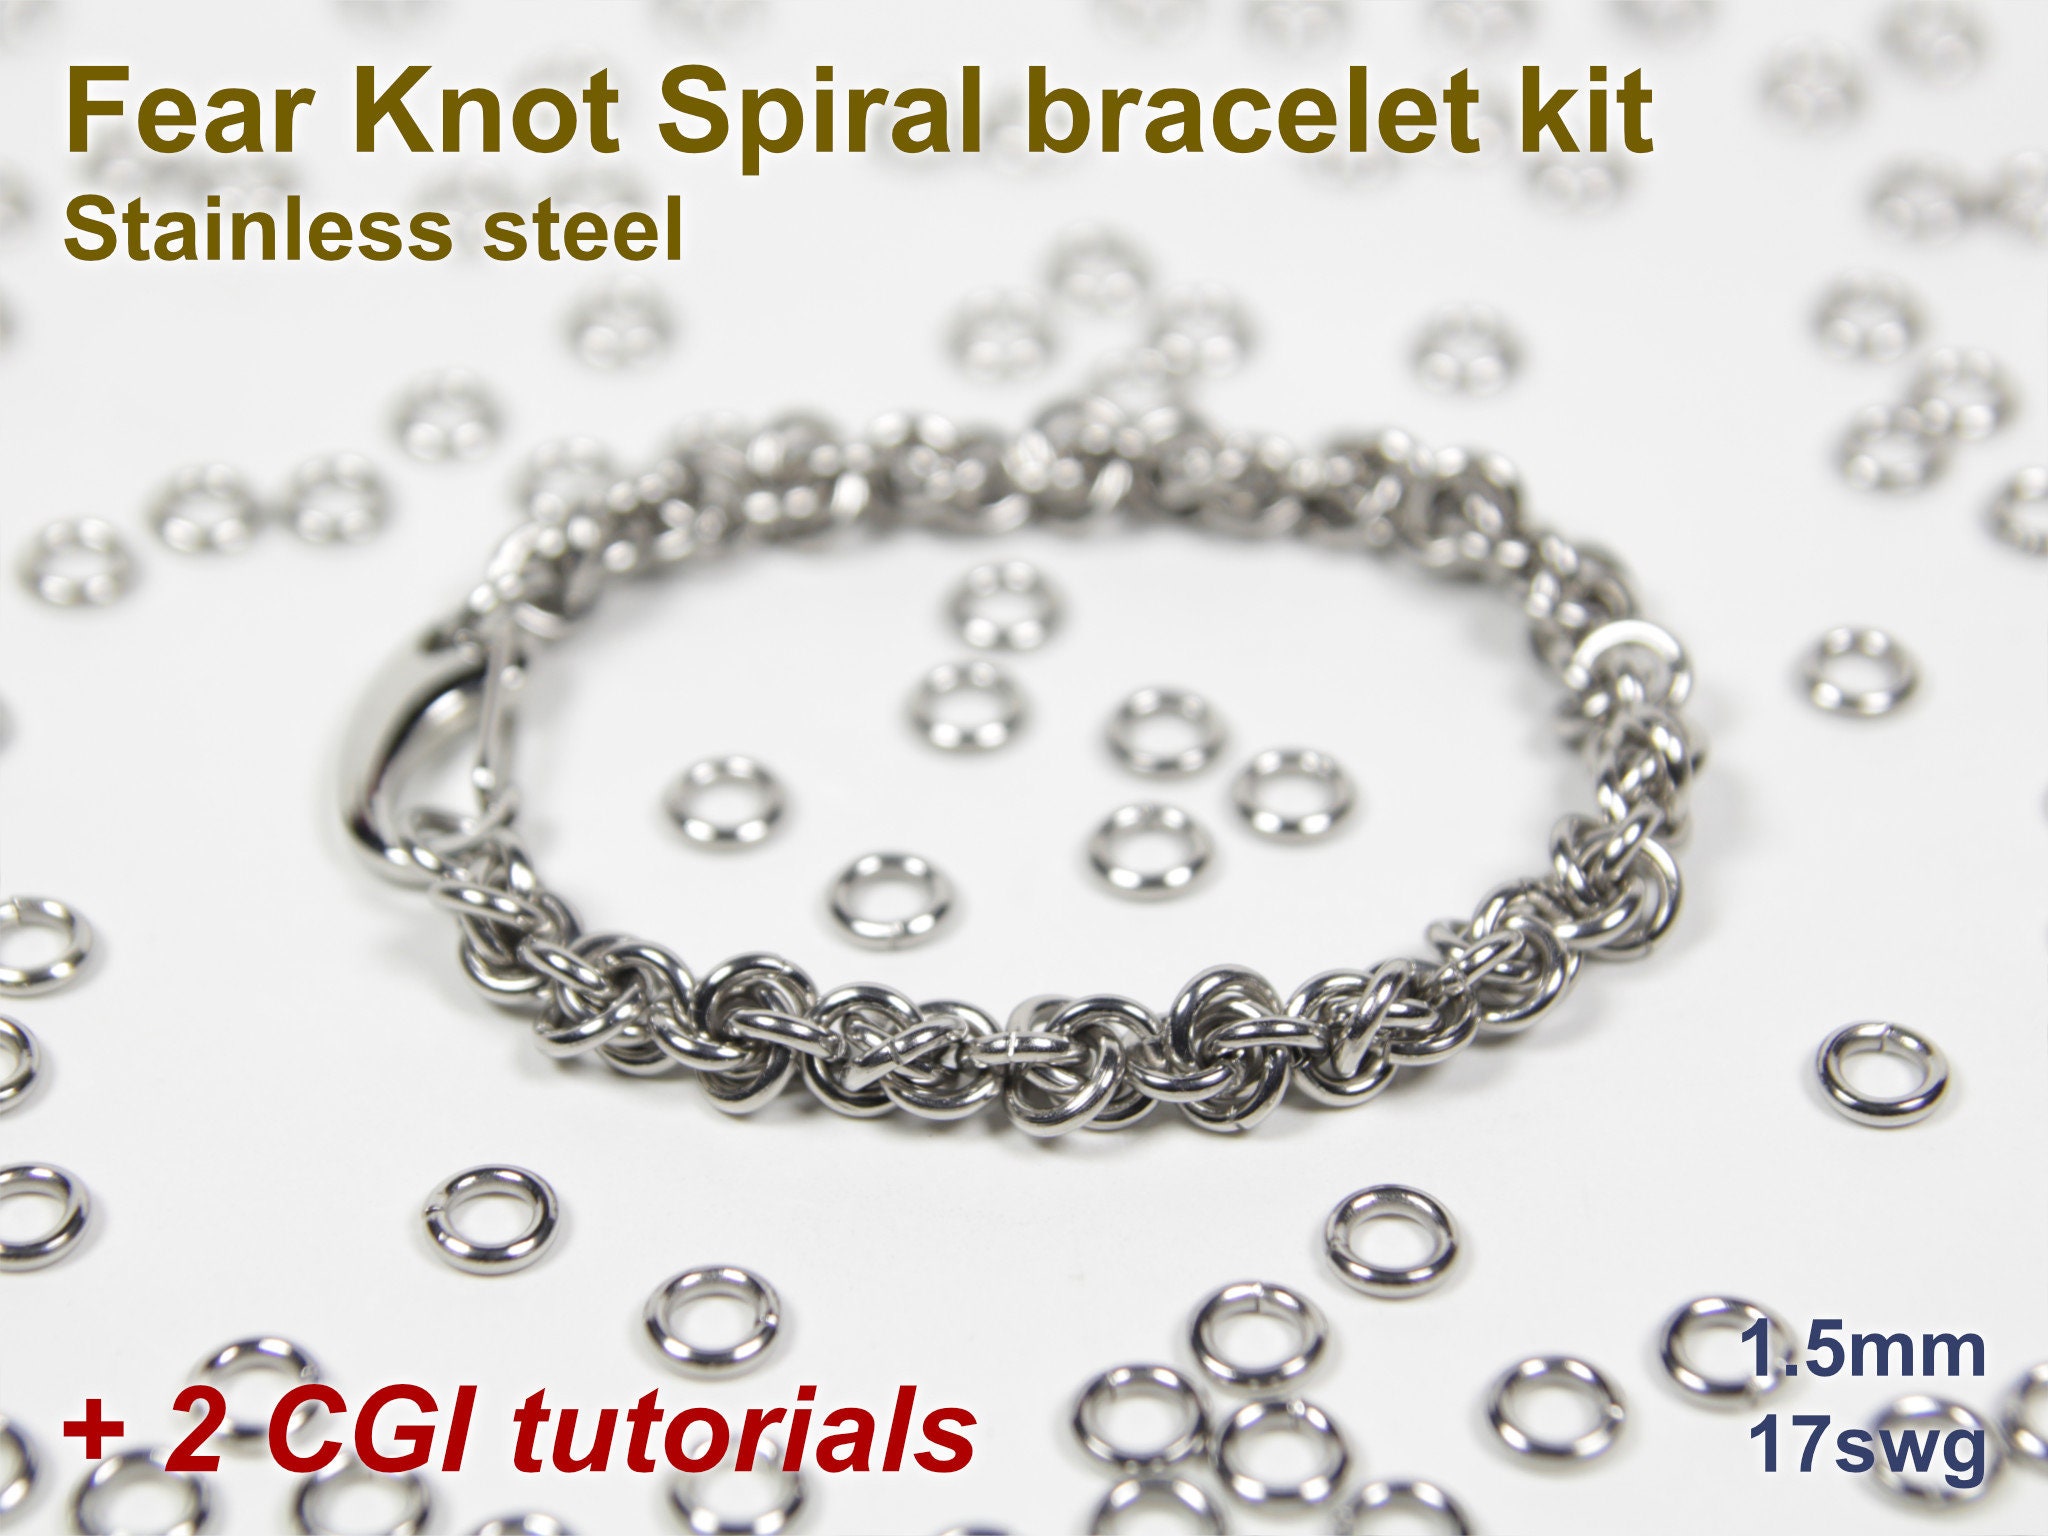 Fear Knot Spiral Bracelet Kit, Chainmaille Kit, Stainless Steel, Chainmail  Kit, Jump Rings, Fear Knot Spiral Tutorial, Chainmaille Tutorial 